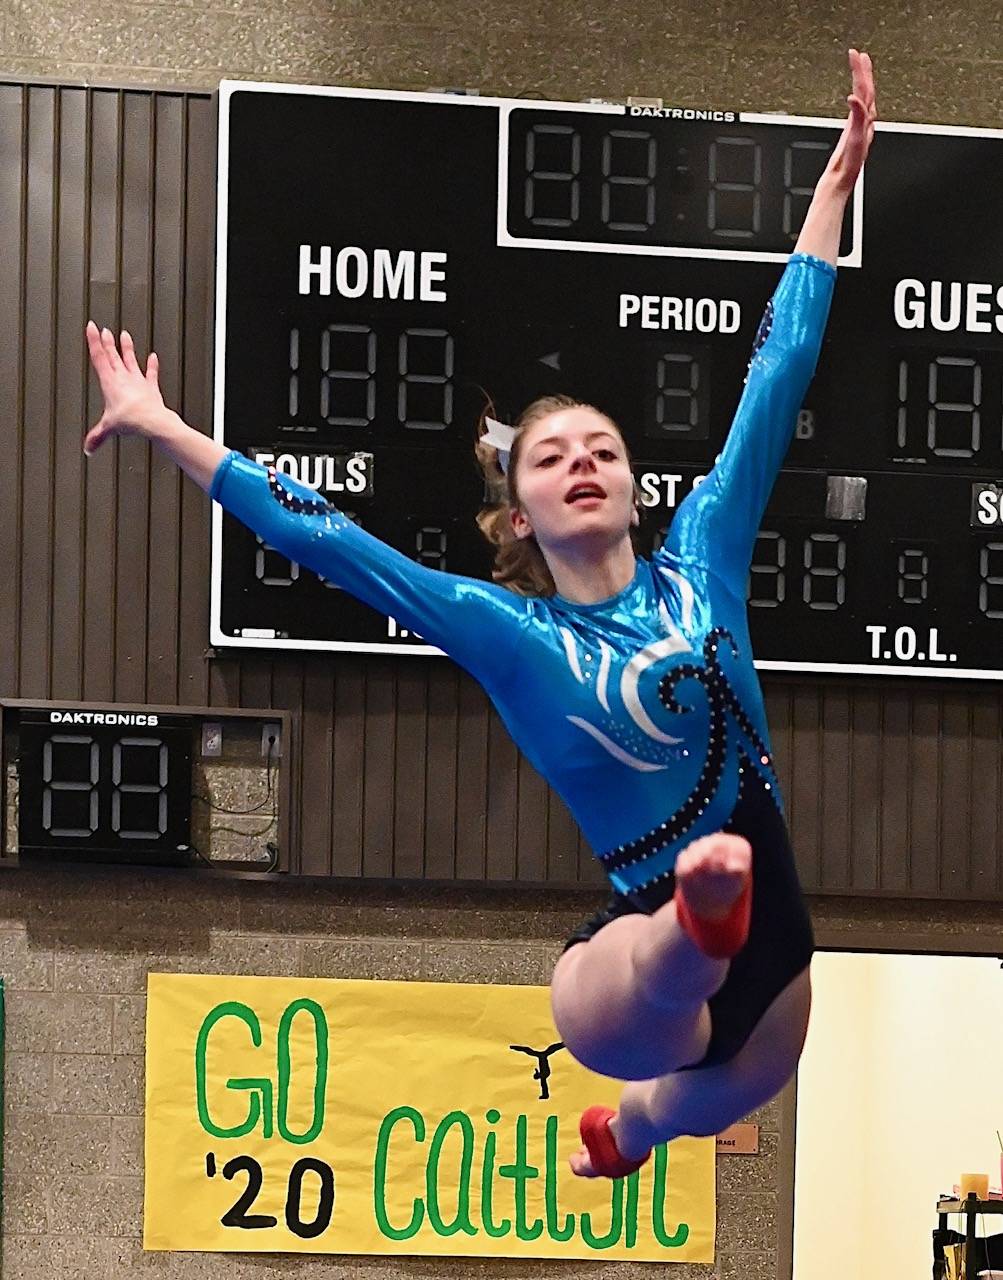 Smooth flight: Top gymnasts compete at a high level